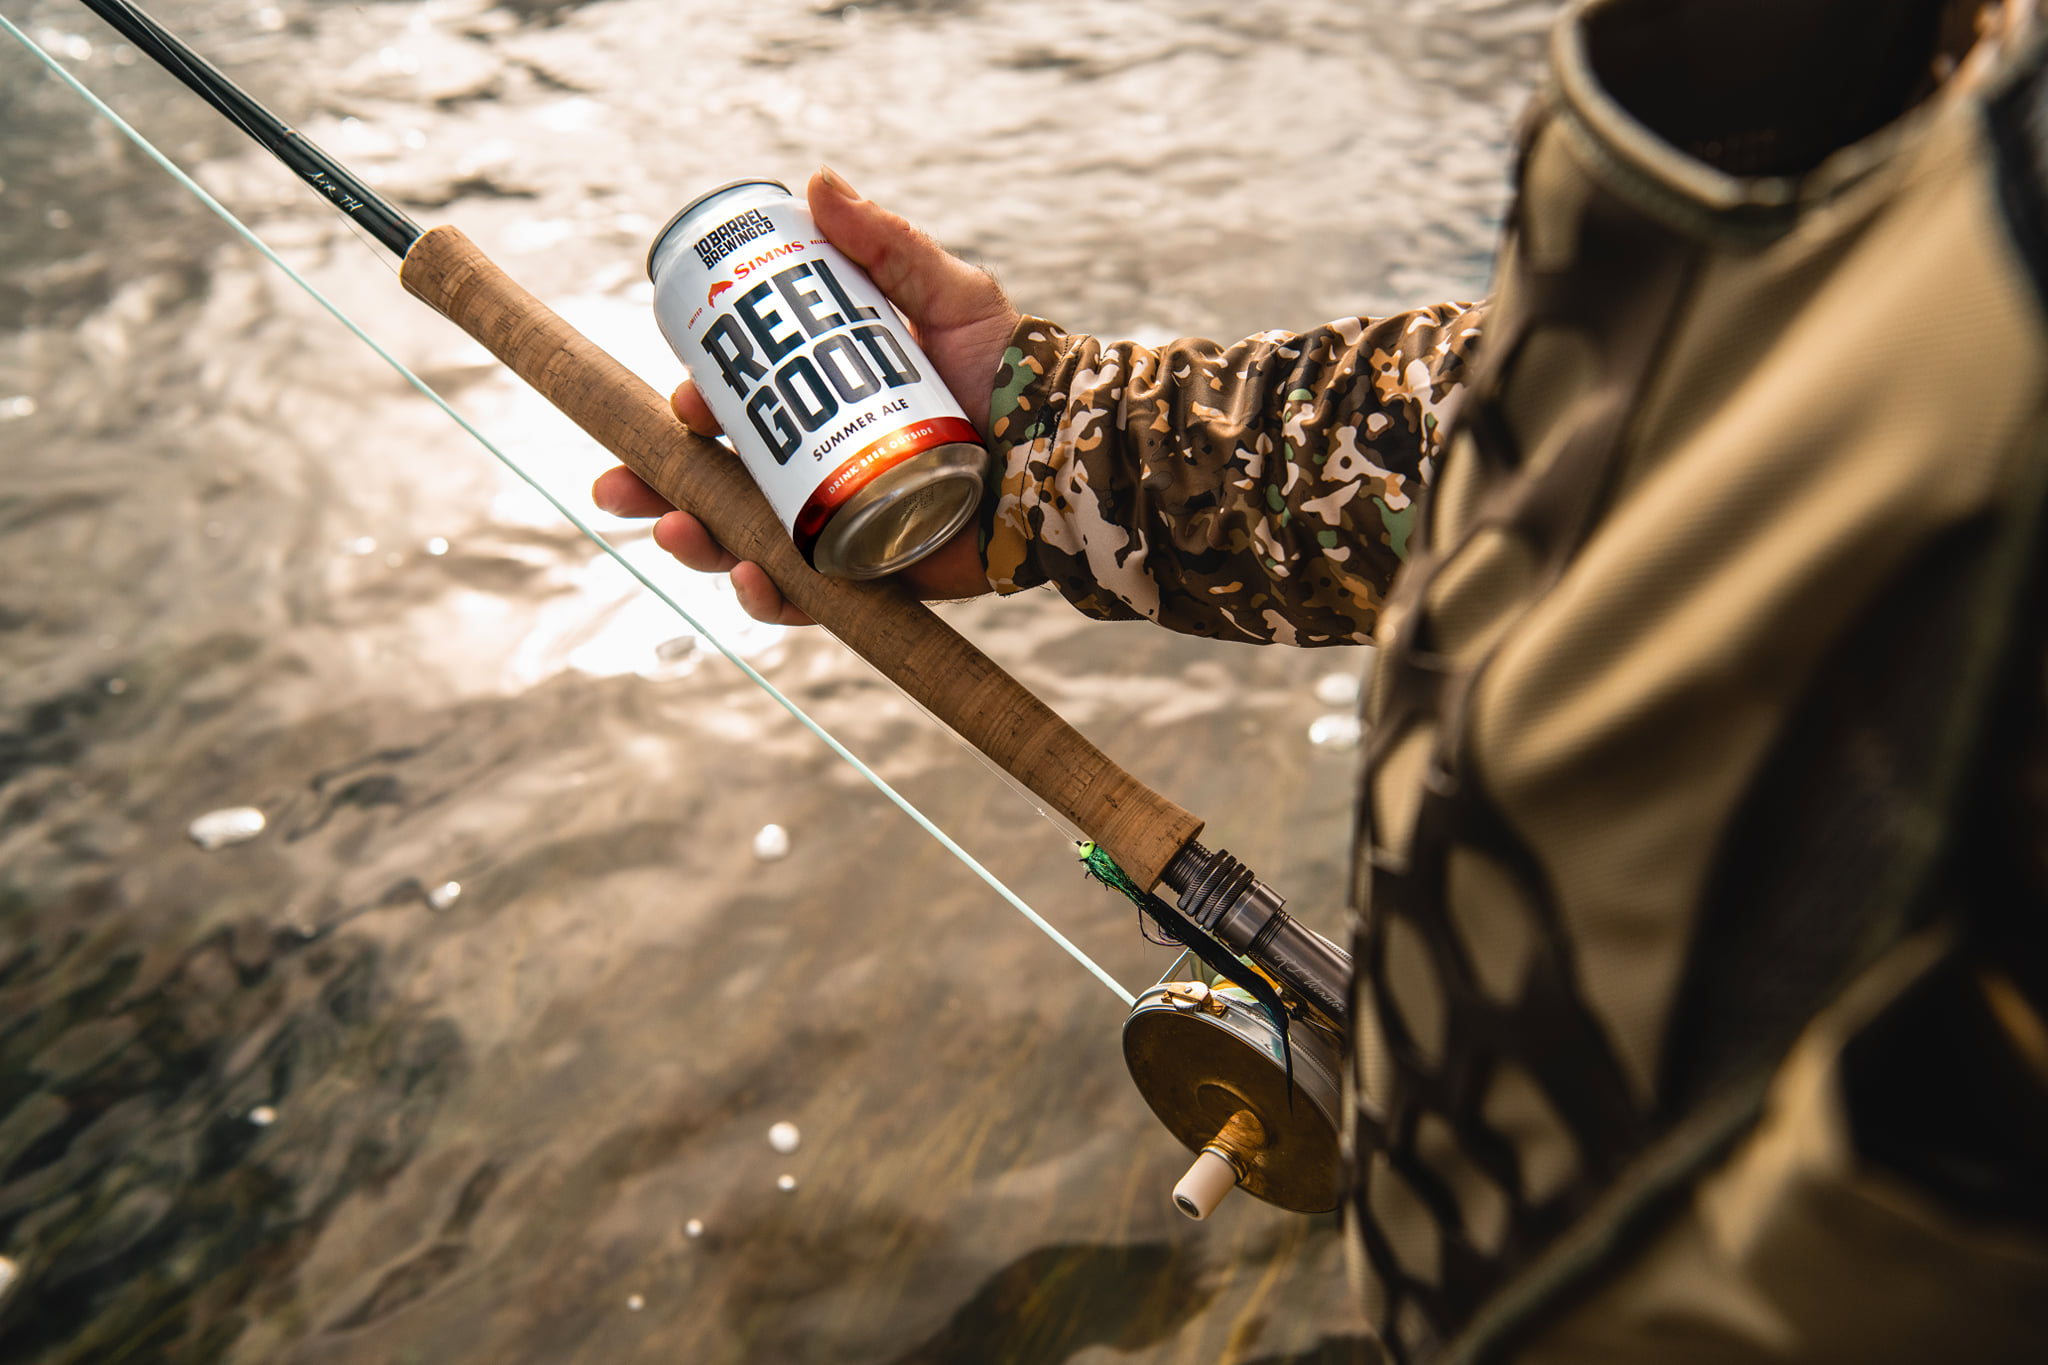 10 Barrel Brewing and Simms Fishing Products Partner on Reel Good Summer Ale. (image courtesy of 10 Barrel Brewing)